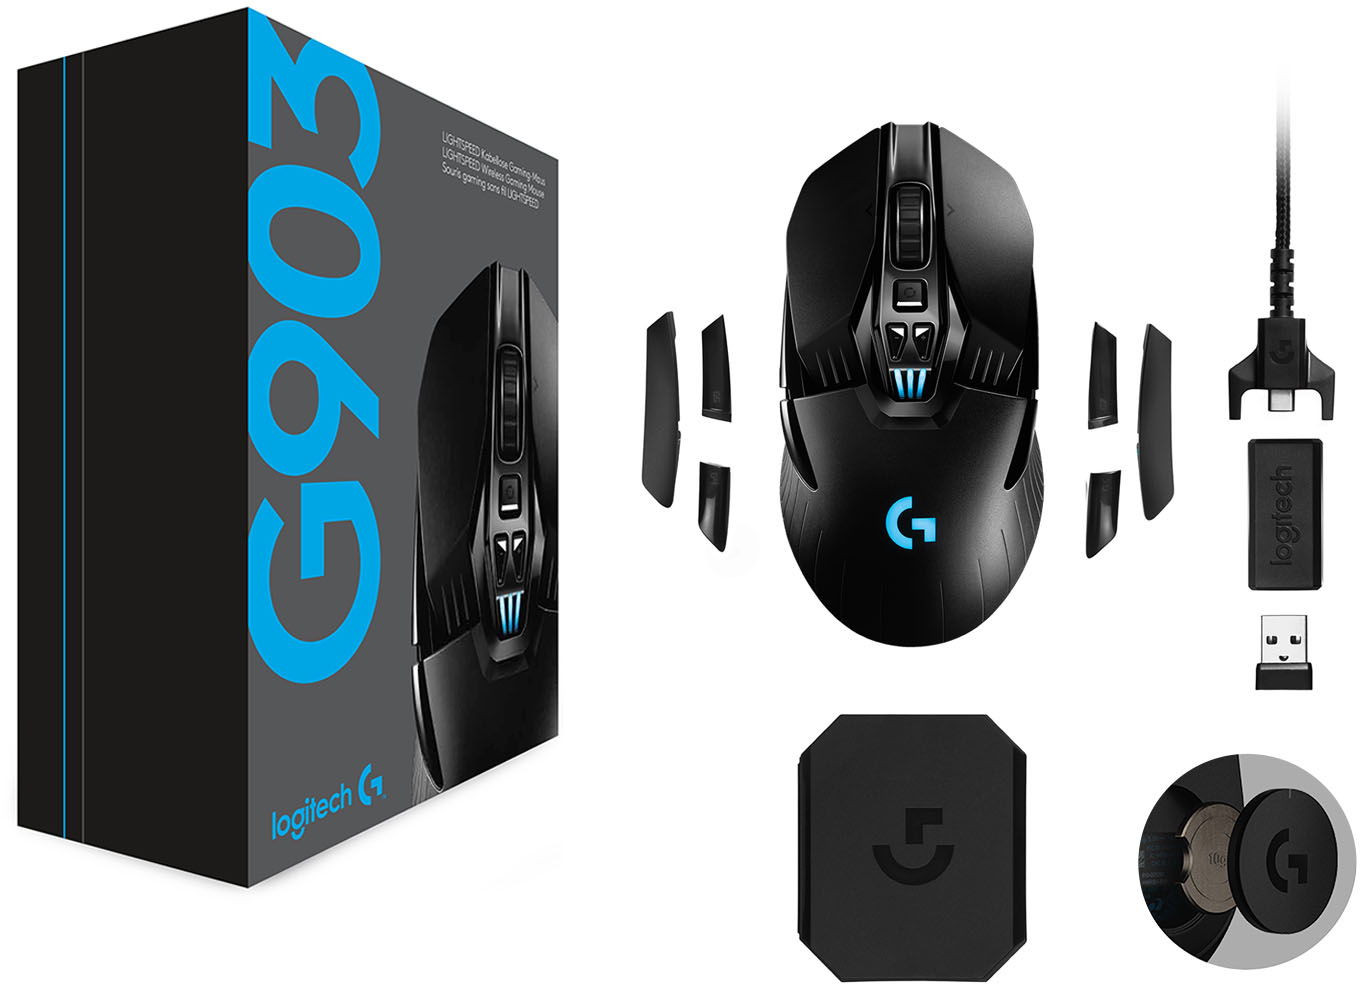 Logitech G903 Lightspeed Gaming Mouse with USB Cable **READ**